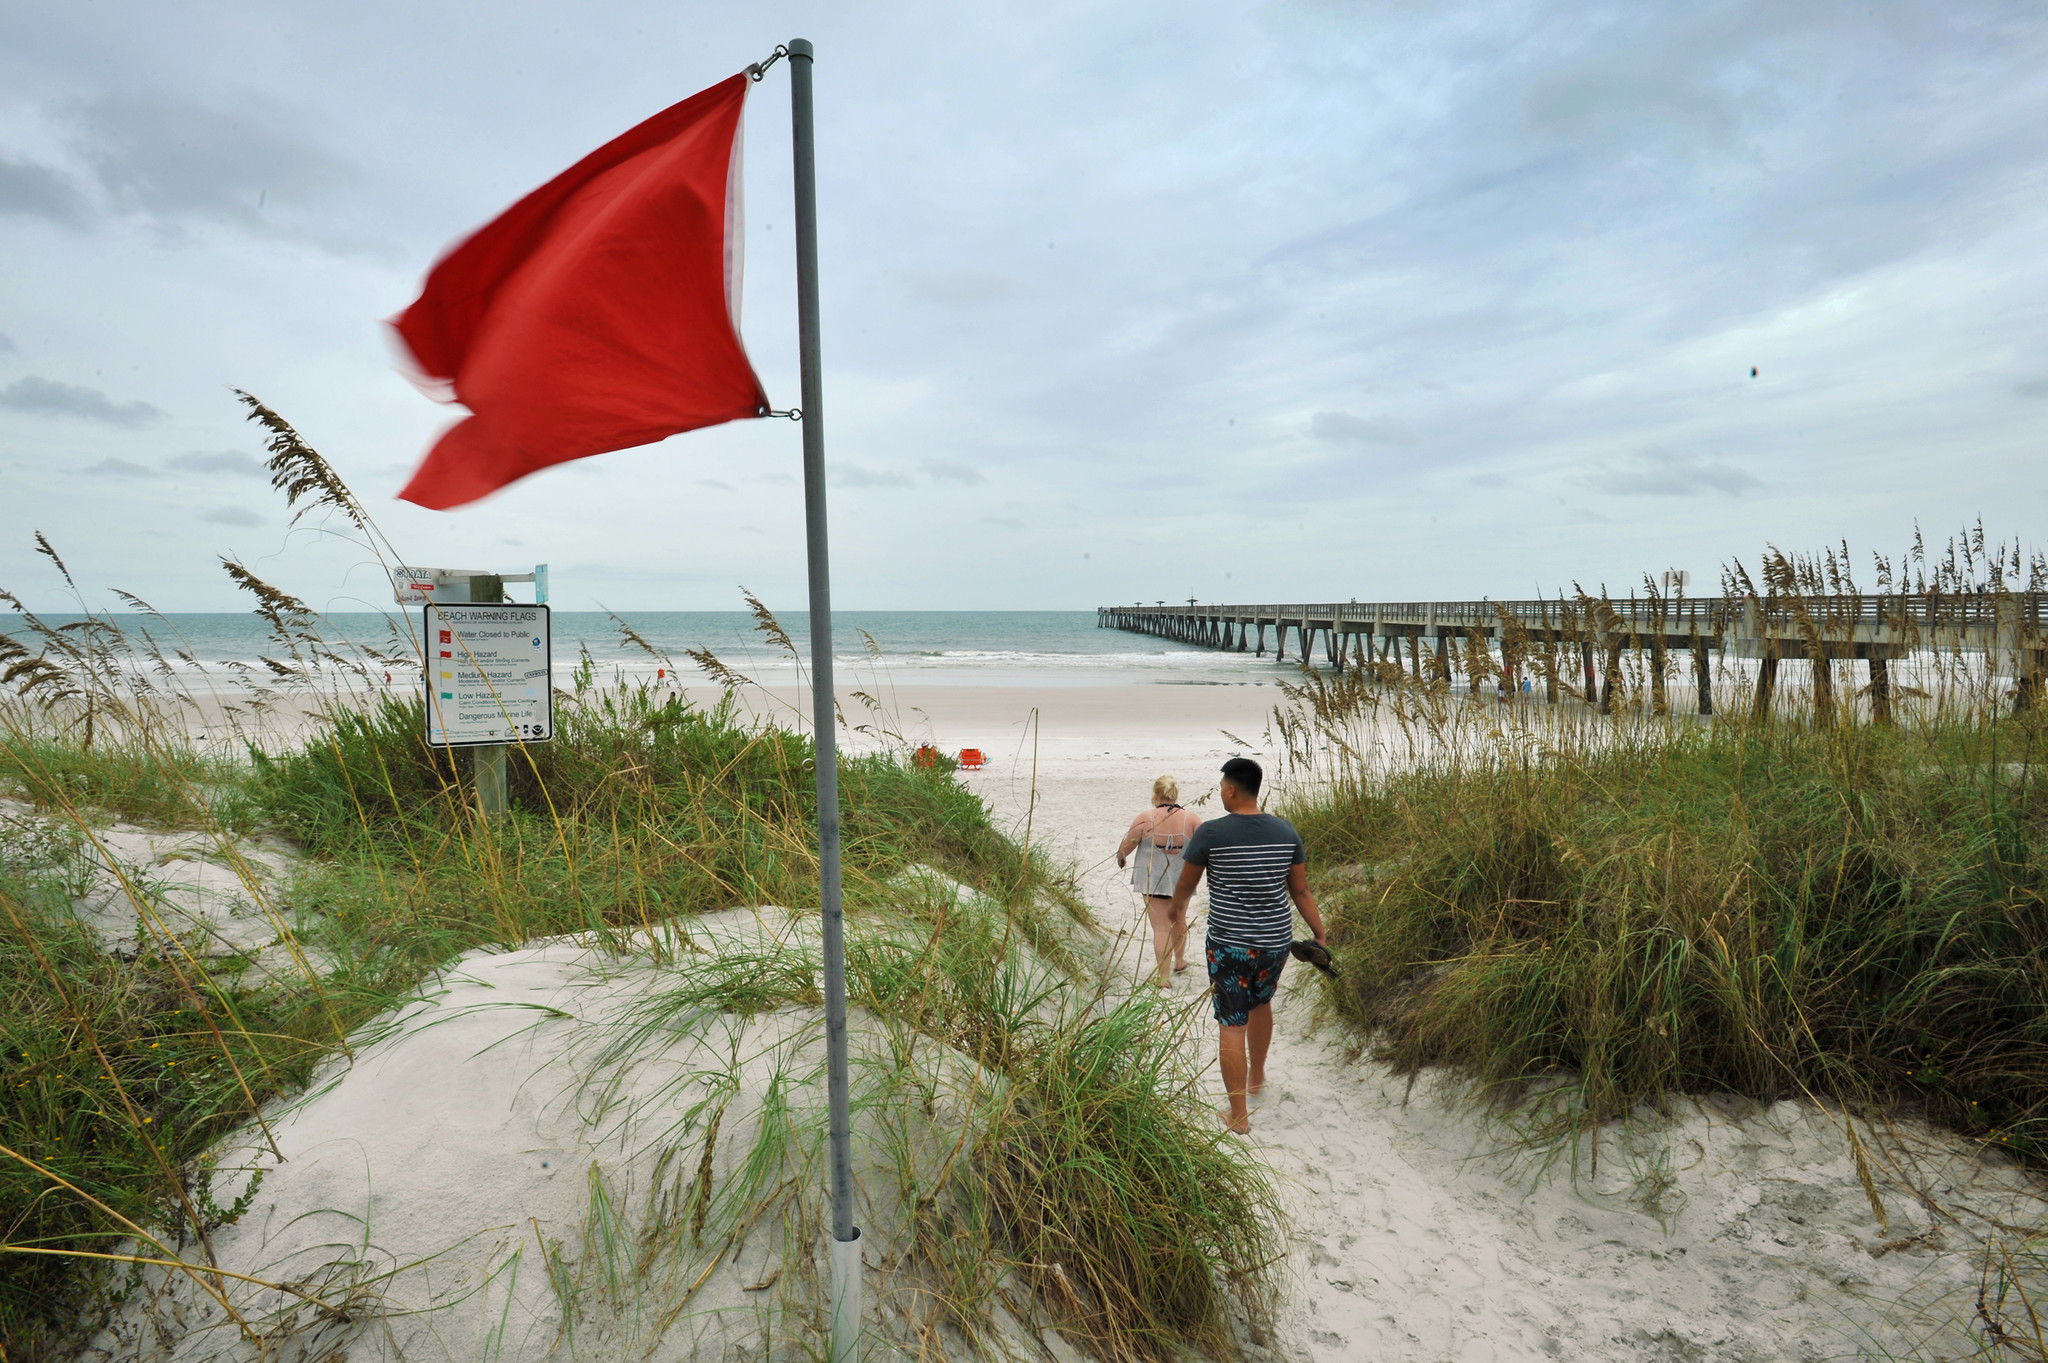 Ocean City under tropical storm warning as Hermine moves